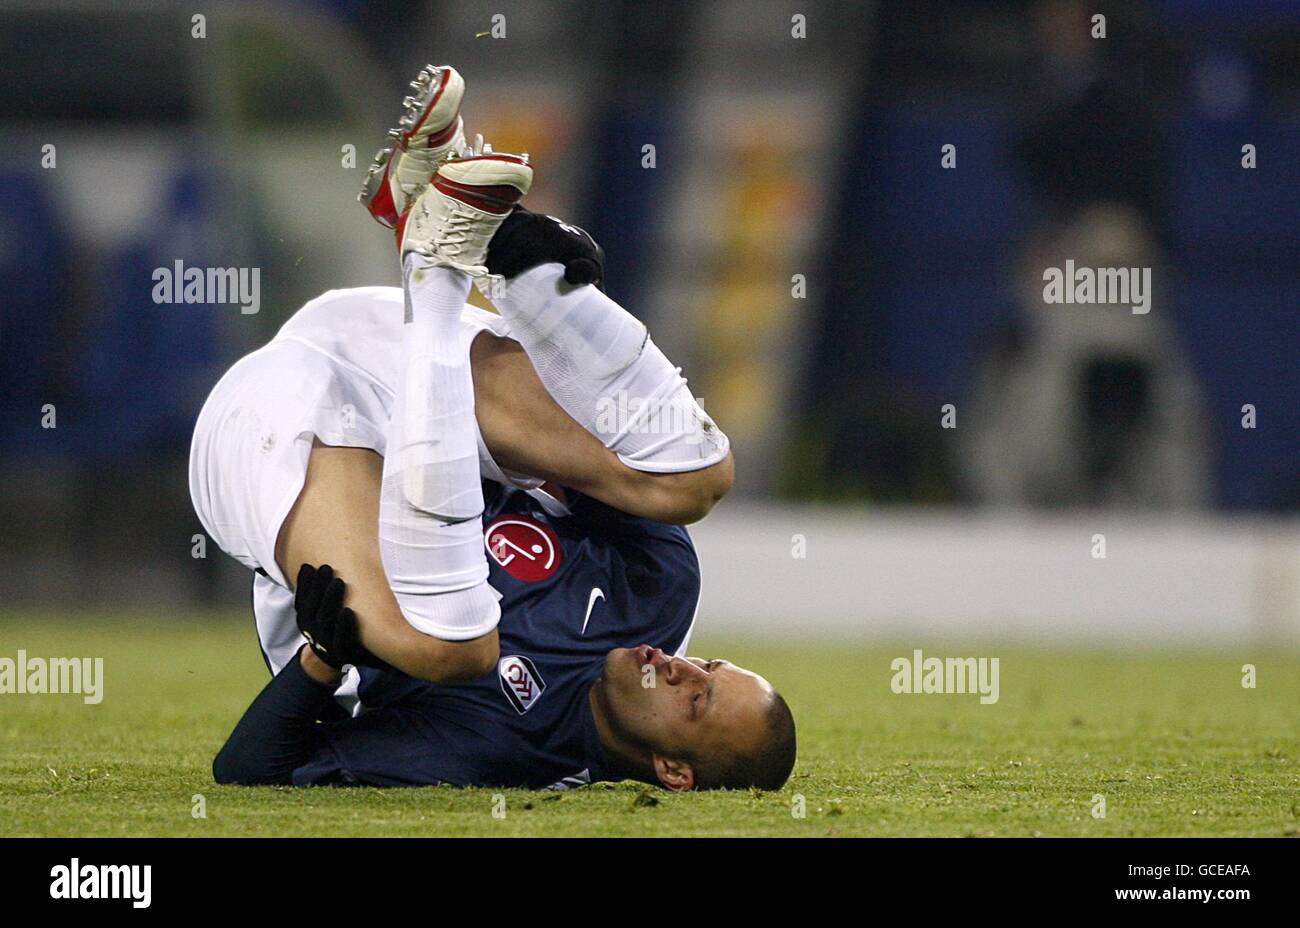 Soccer - UEFA Europa League - Semi Final - First Leg - Hamburg SV v Fulham - HSH Nordbank Arena. Fulham's Bobby Zamora reacts after a strong tackle Stock Photo